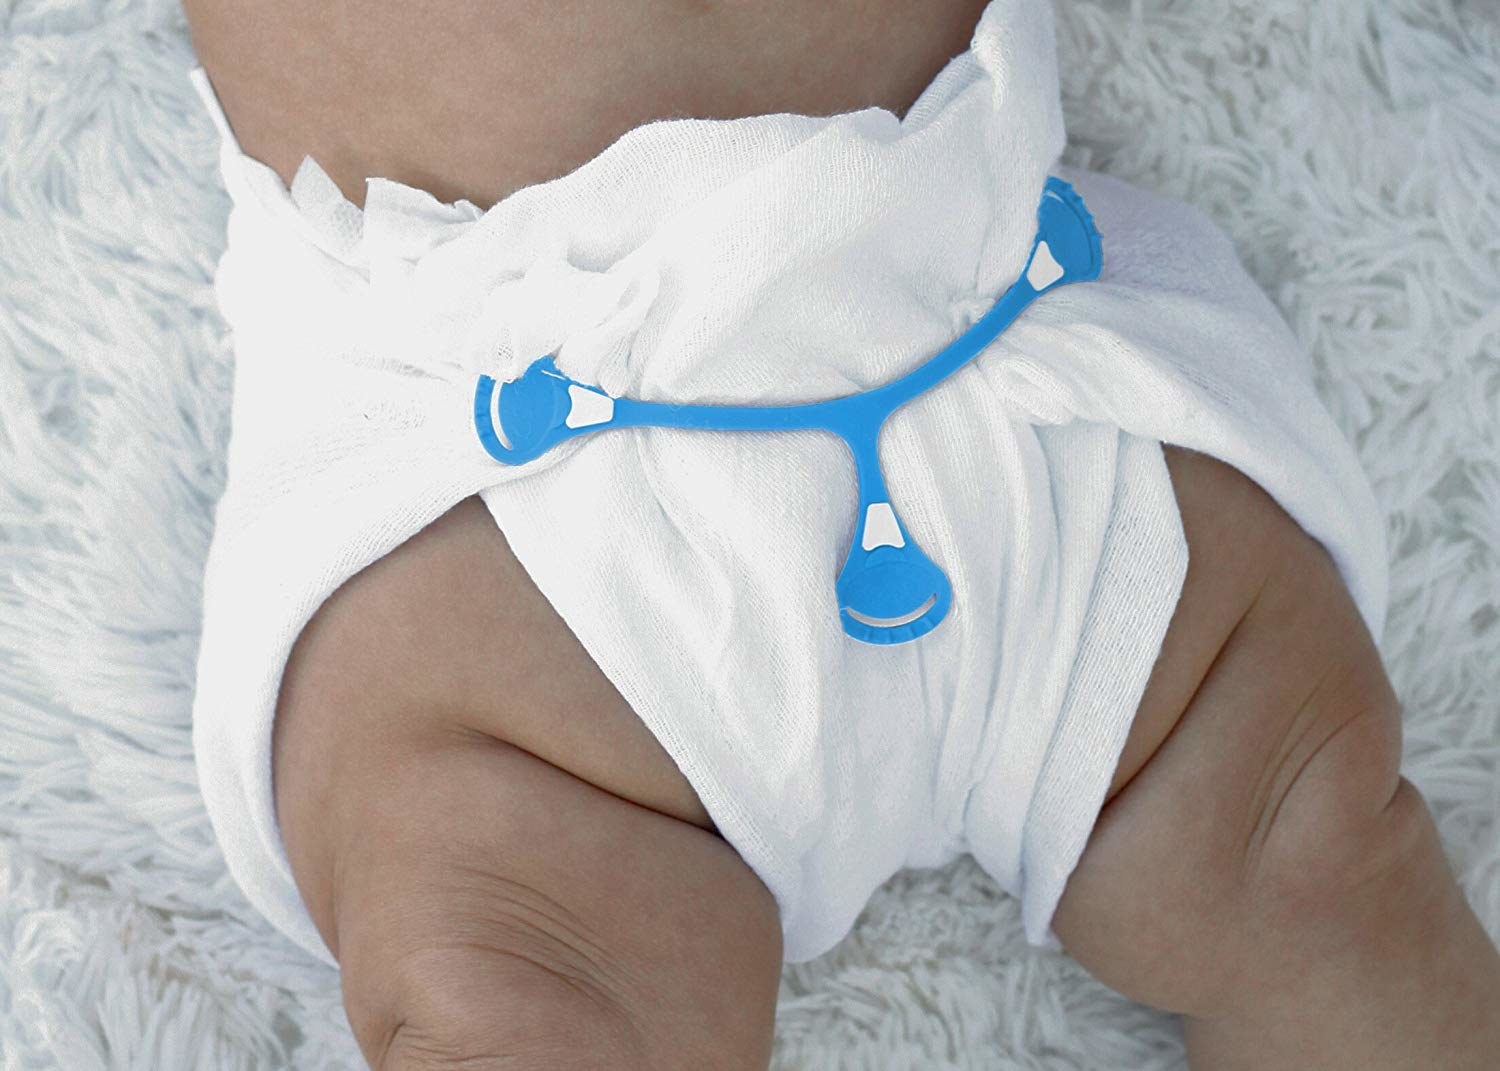 baby wearing a cloth diaper with the fastener holding it together